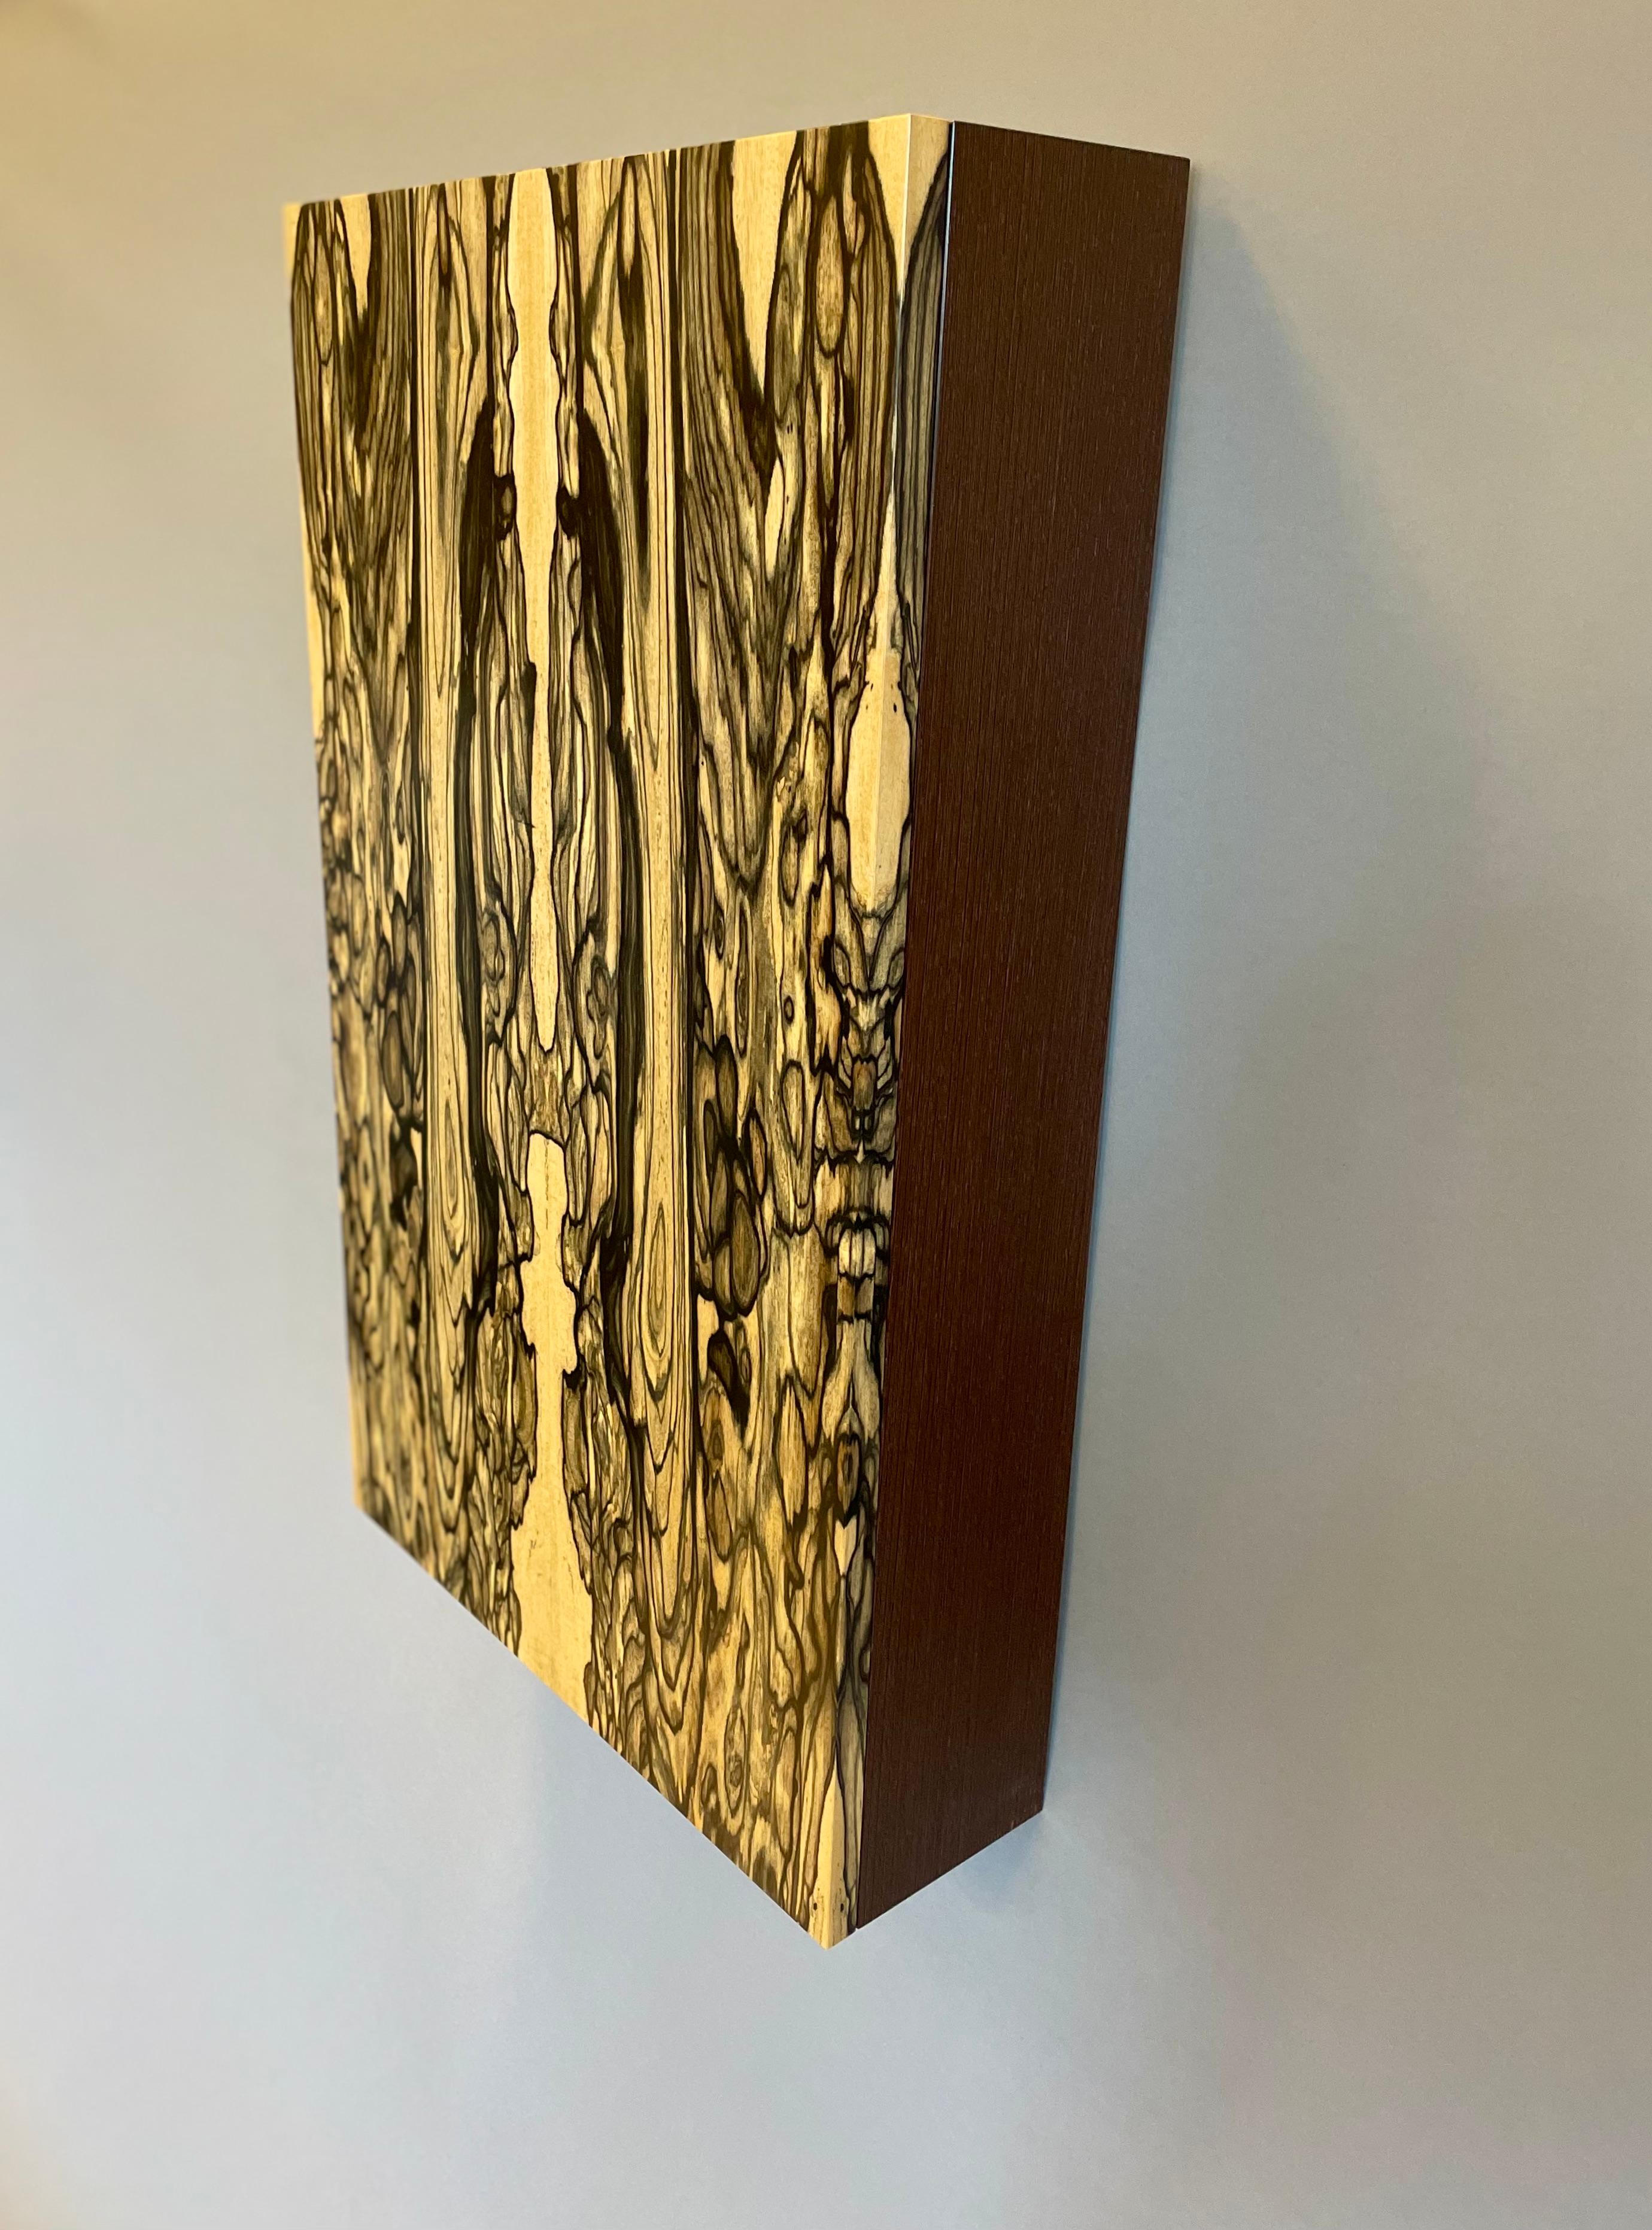 Jewelry Case ONE celebrates material & minimal design. At first glance it appears as a stunning wall piece, subtly inviting a closer study. Upon doing so one finds 
a door held shut by a tiny magnet, easily opened with a gentle pull to the edge. The